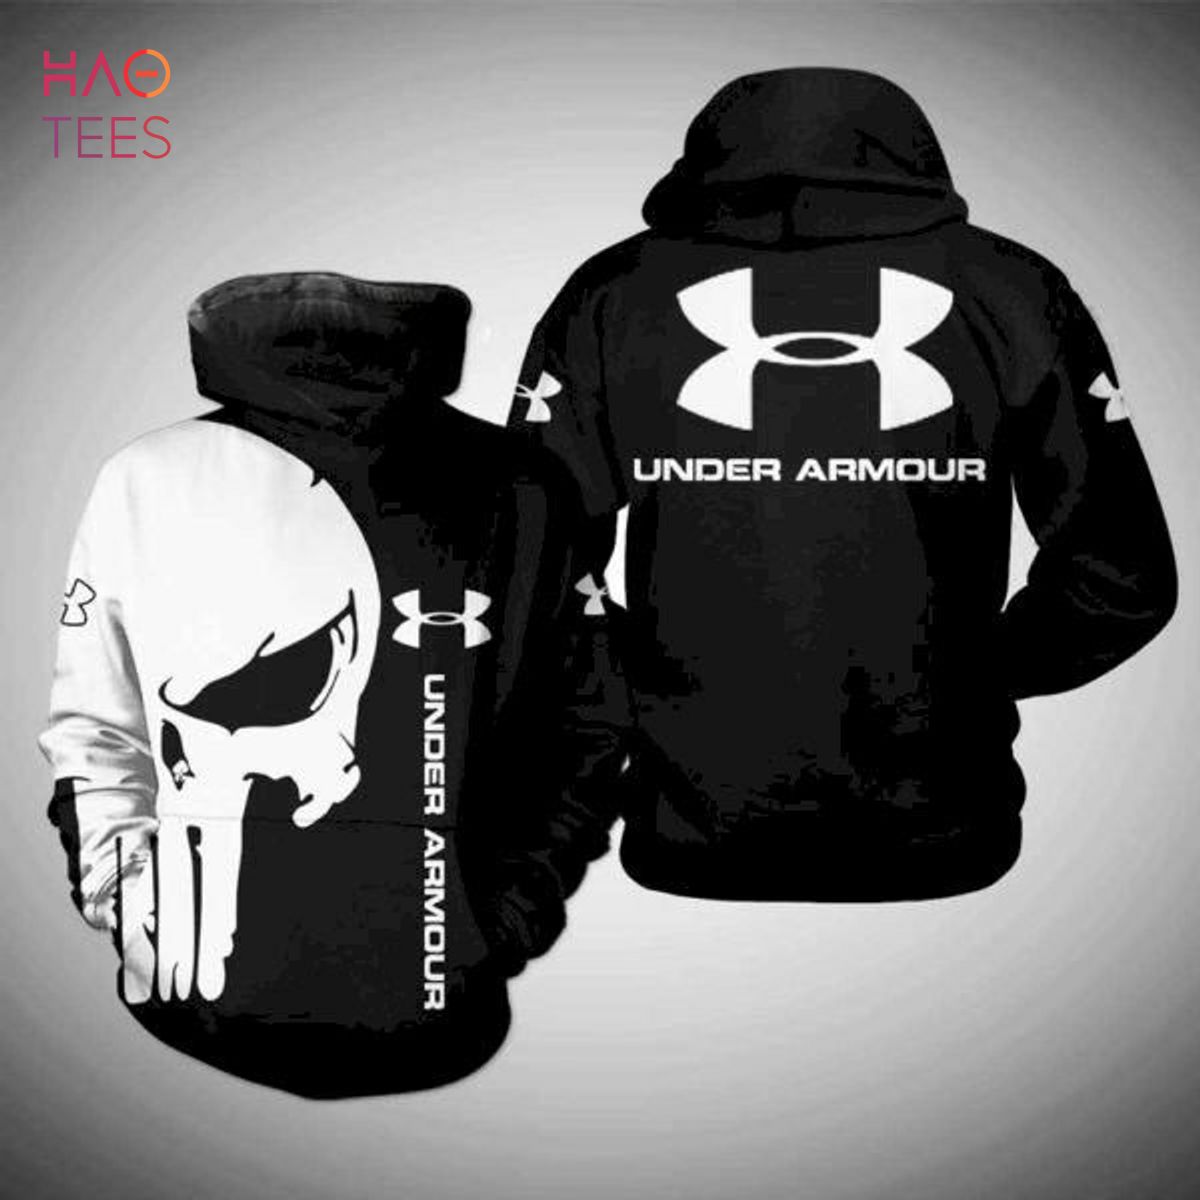 Under Armour Punisher Tntll Black All Over Printed 3D Hoodie